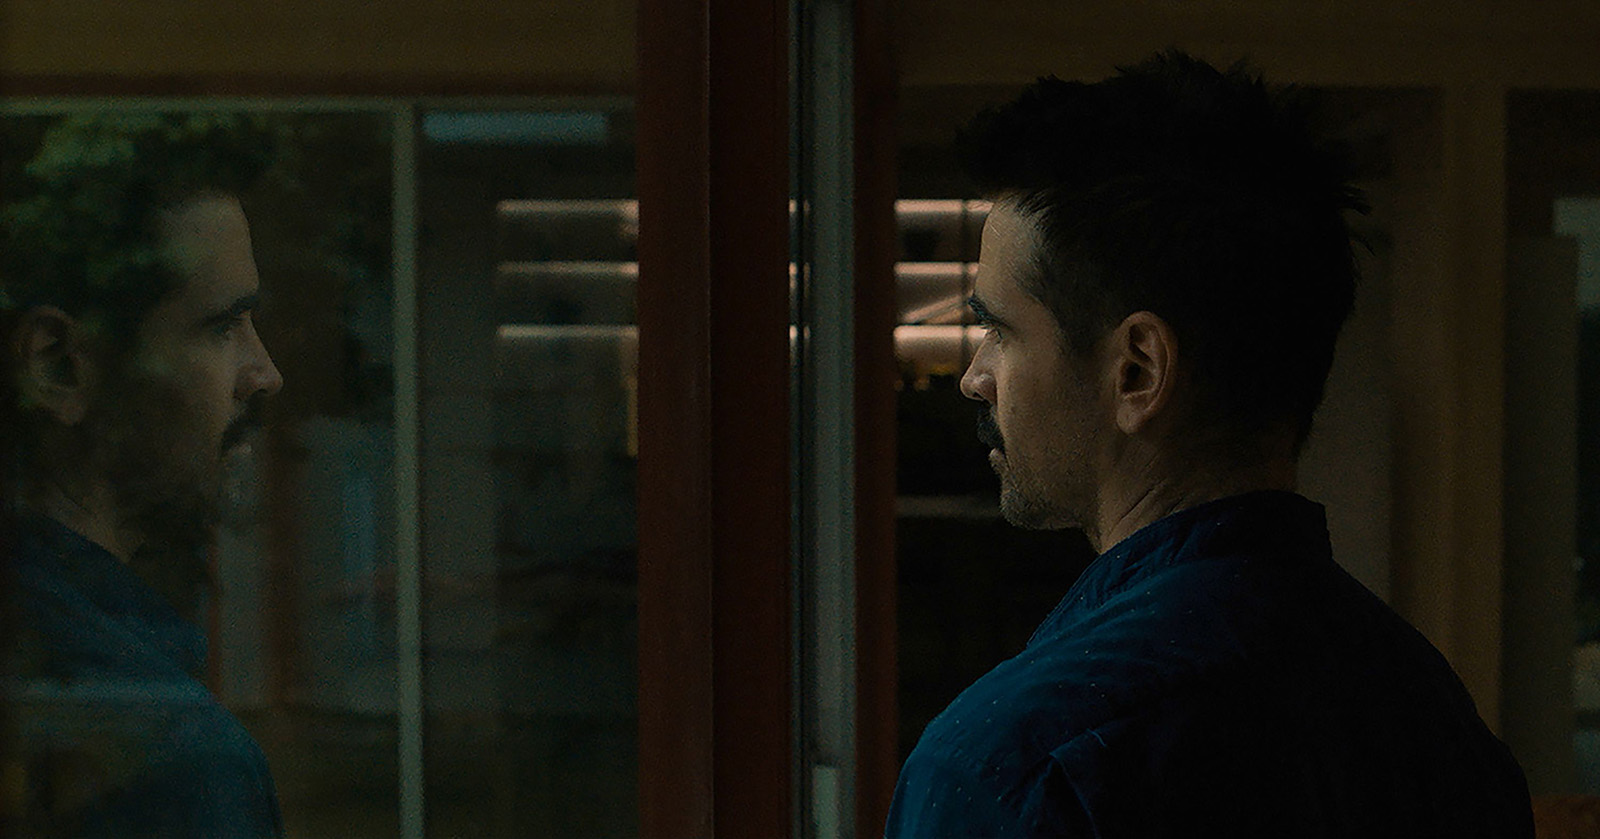 Colin Farrell as Jake in After Yang. Image © A24